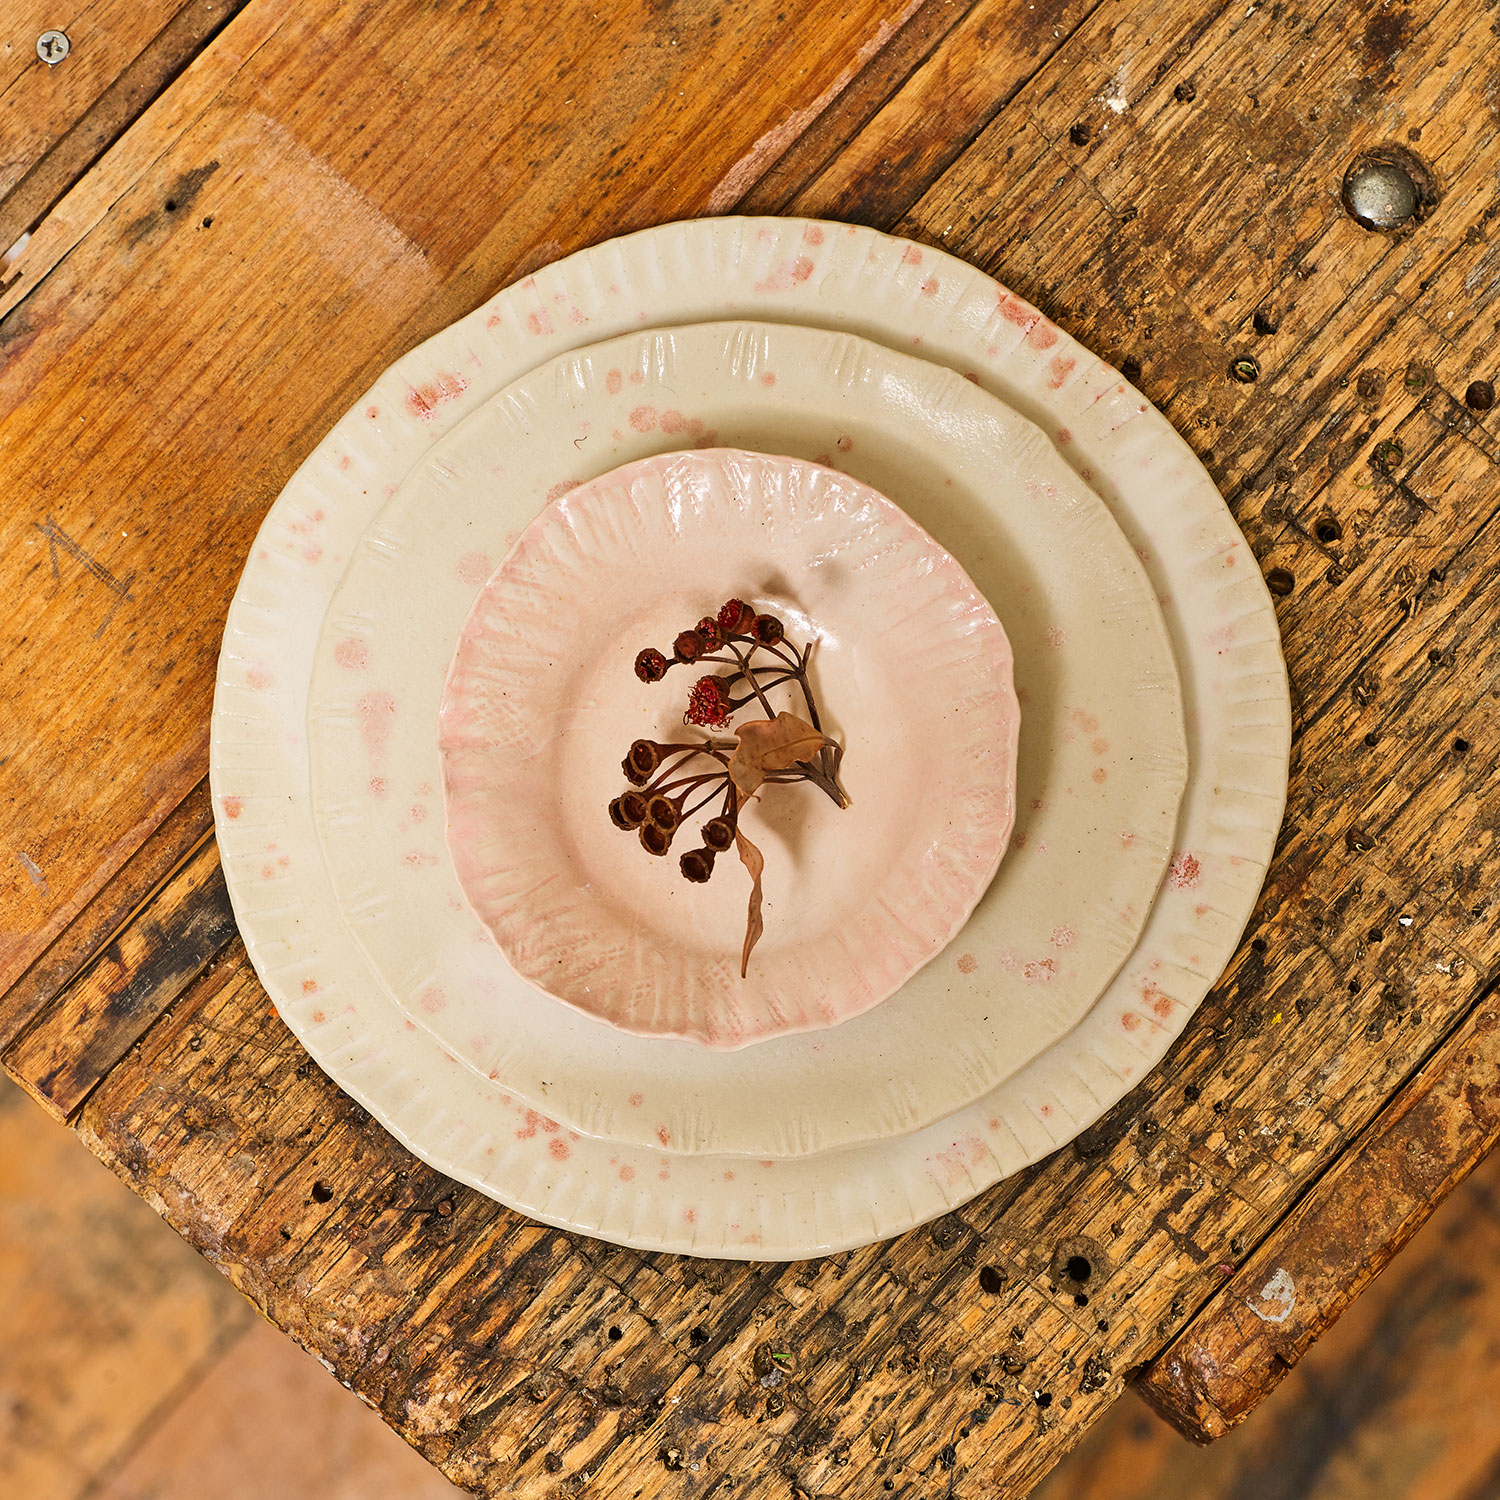 Ceramic plates by Clay Beehive